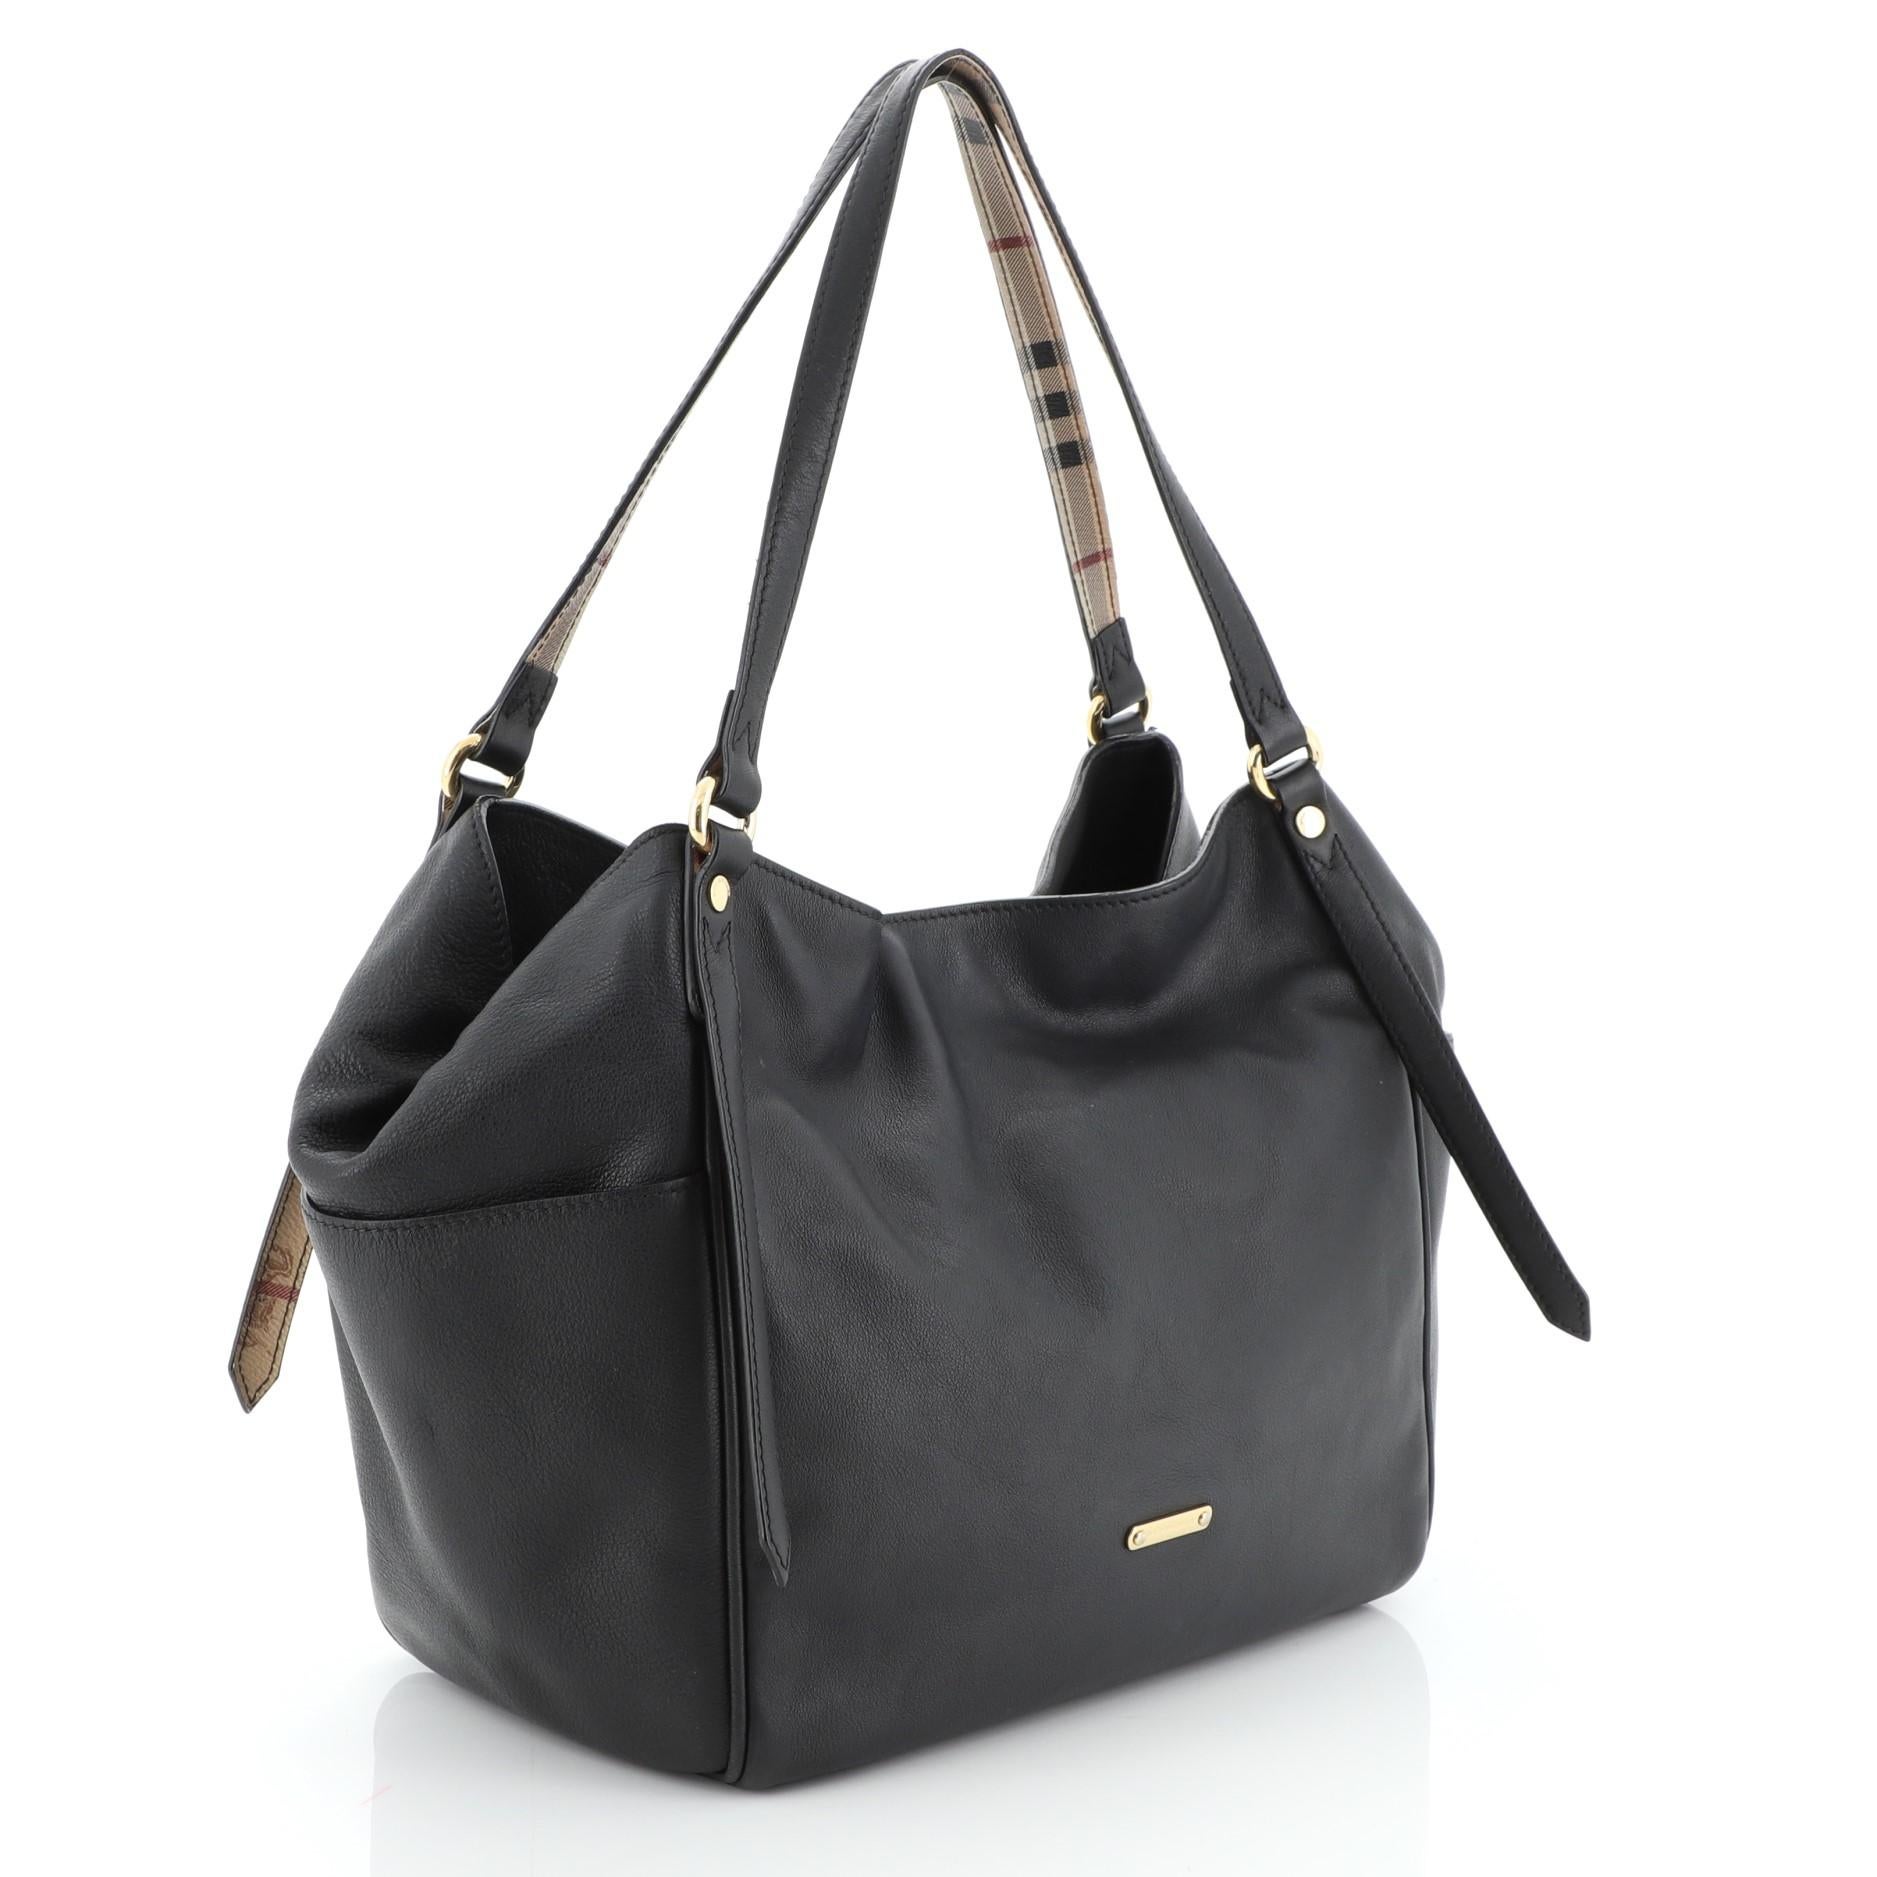 This Burberry Canterbury Tote Leather Small, crafted from black leather, features dual tall adjustable handles, Burberry logo, and gold-tone hardware. Its magnetic snap closure opens to a black fabric interior with side wall zip and slip